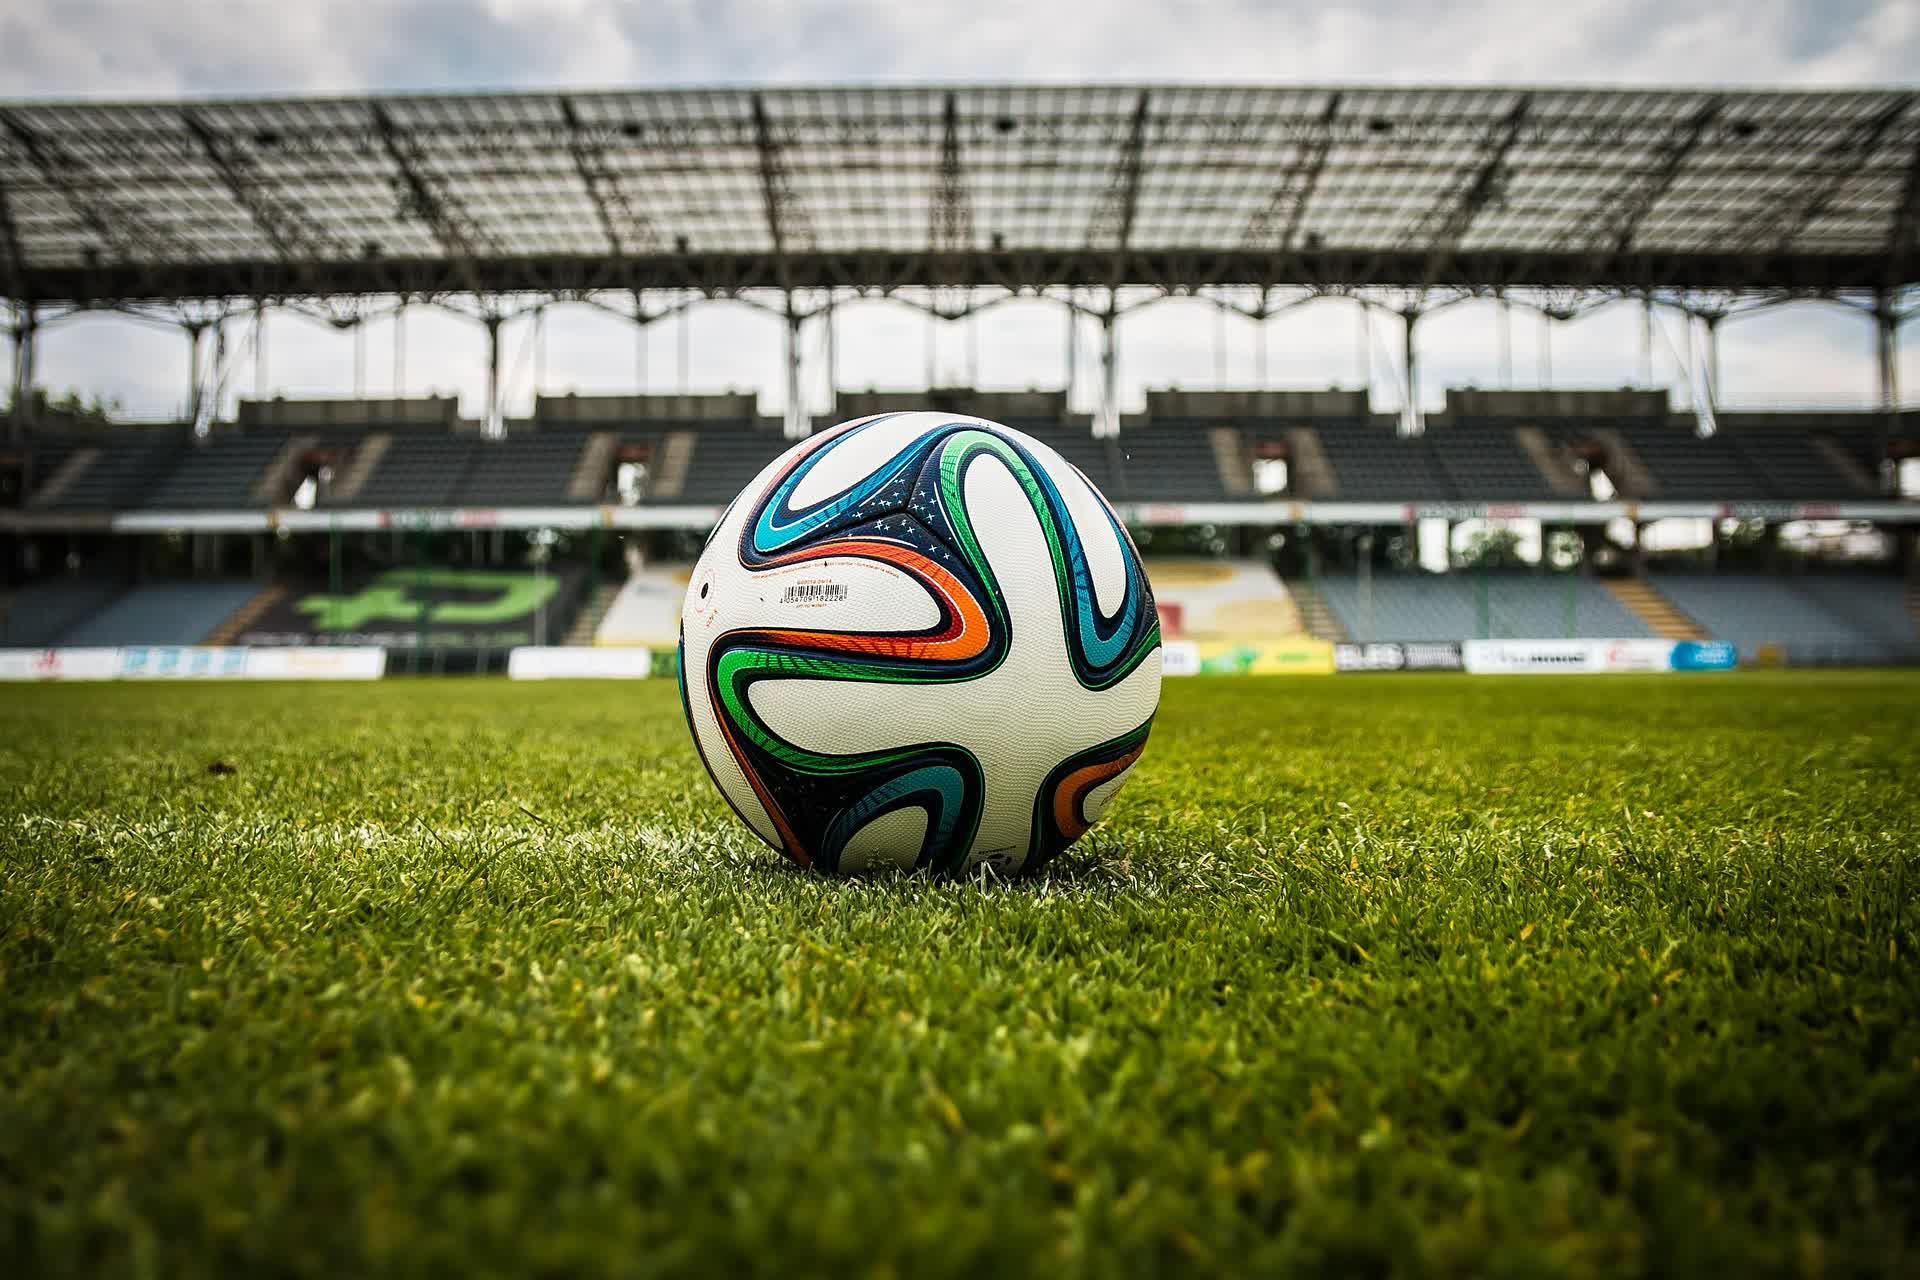 European football fans have spent millions on crypto-based fan tokens